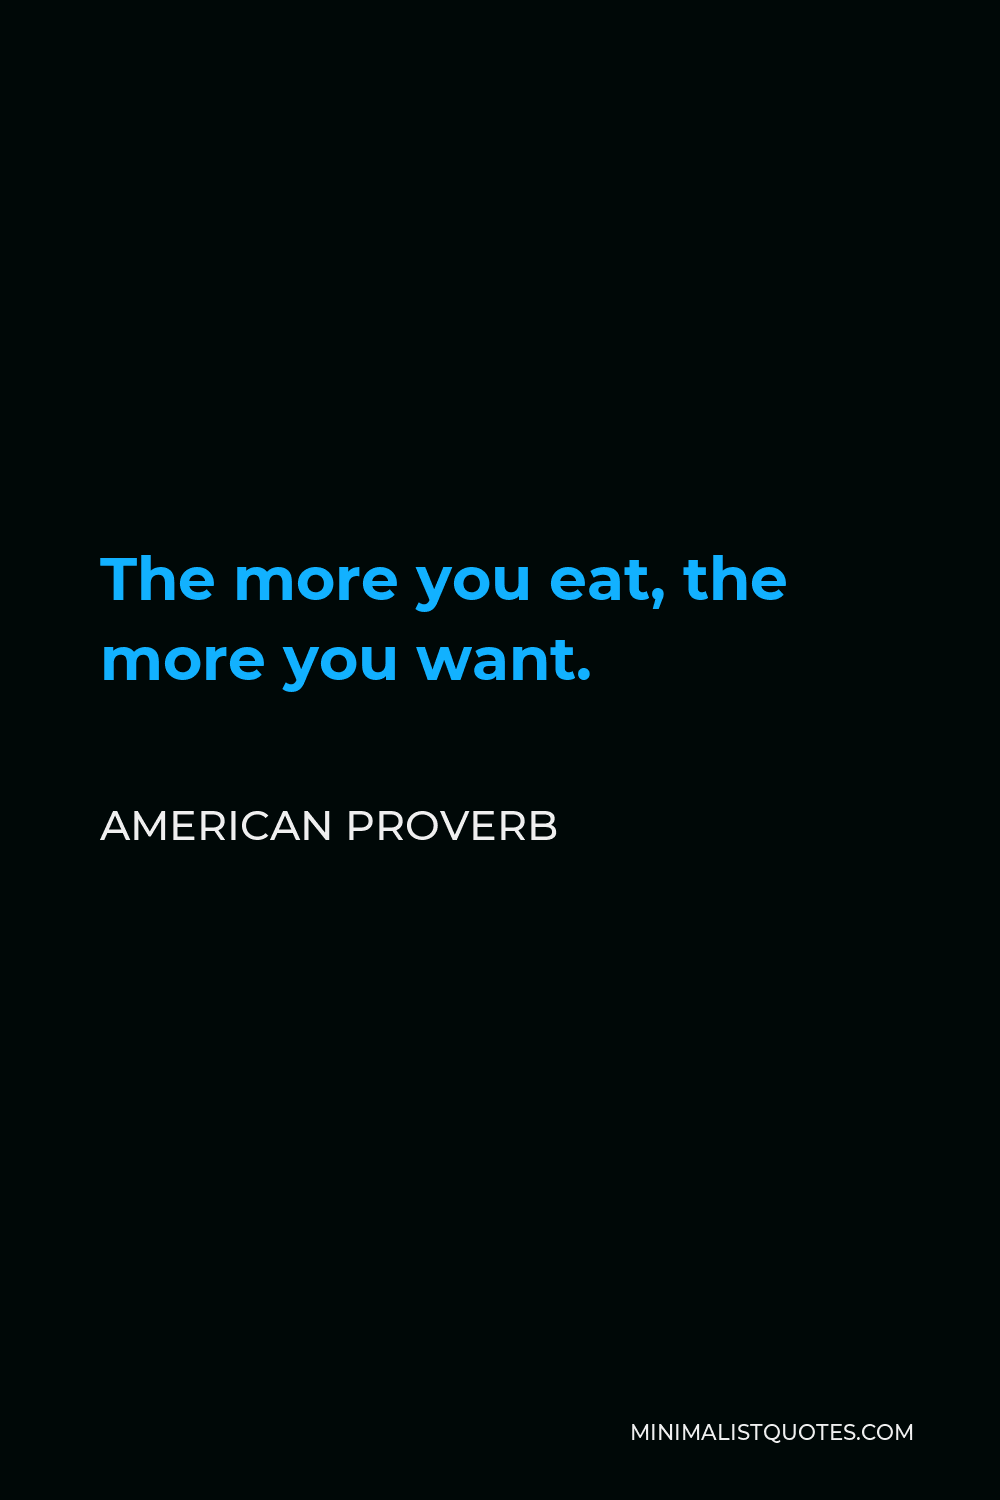 American Proverb Quote - The more you eat, the more you want.